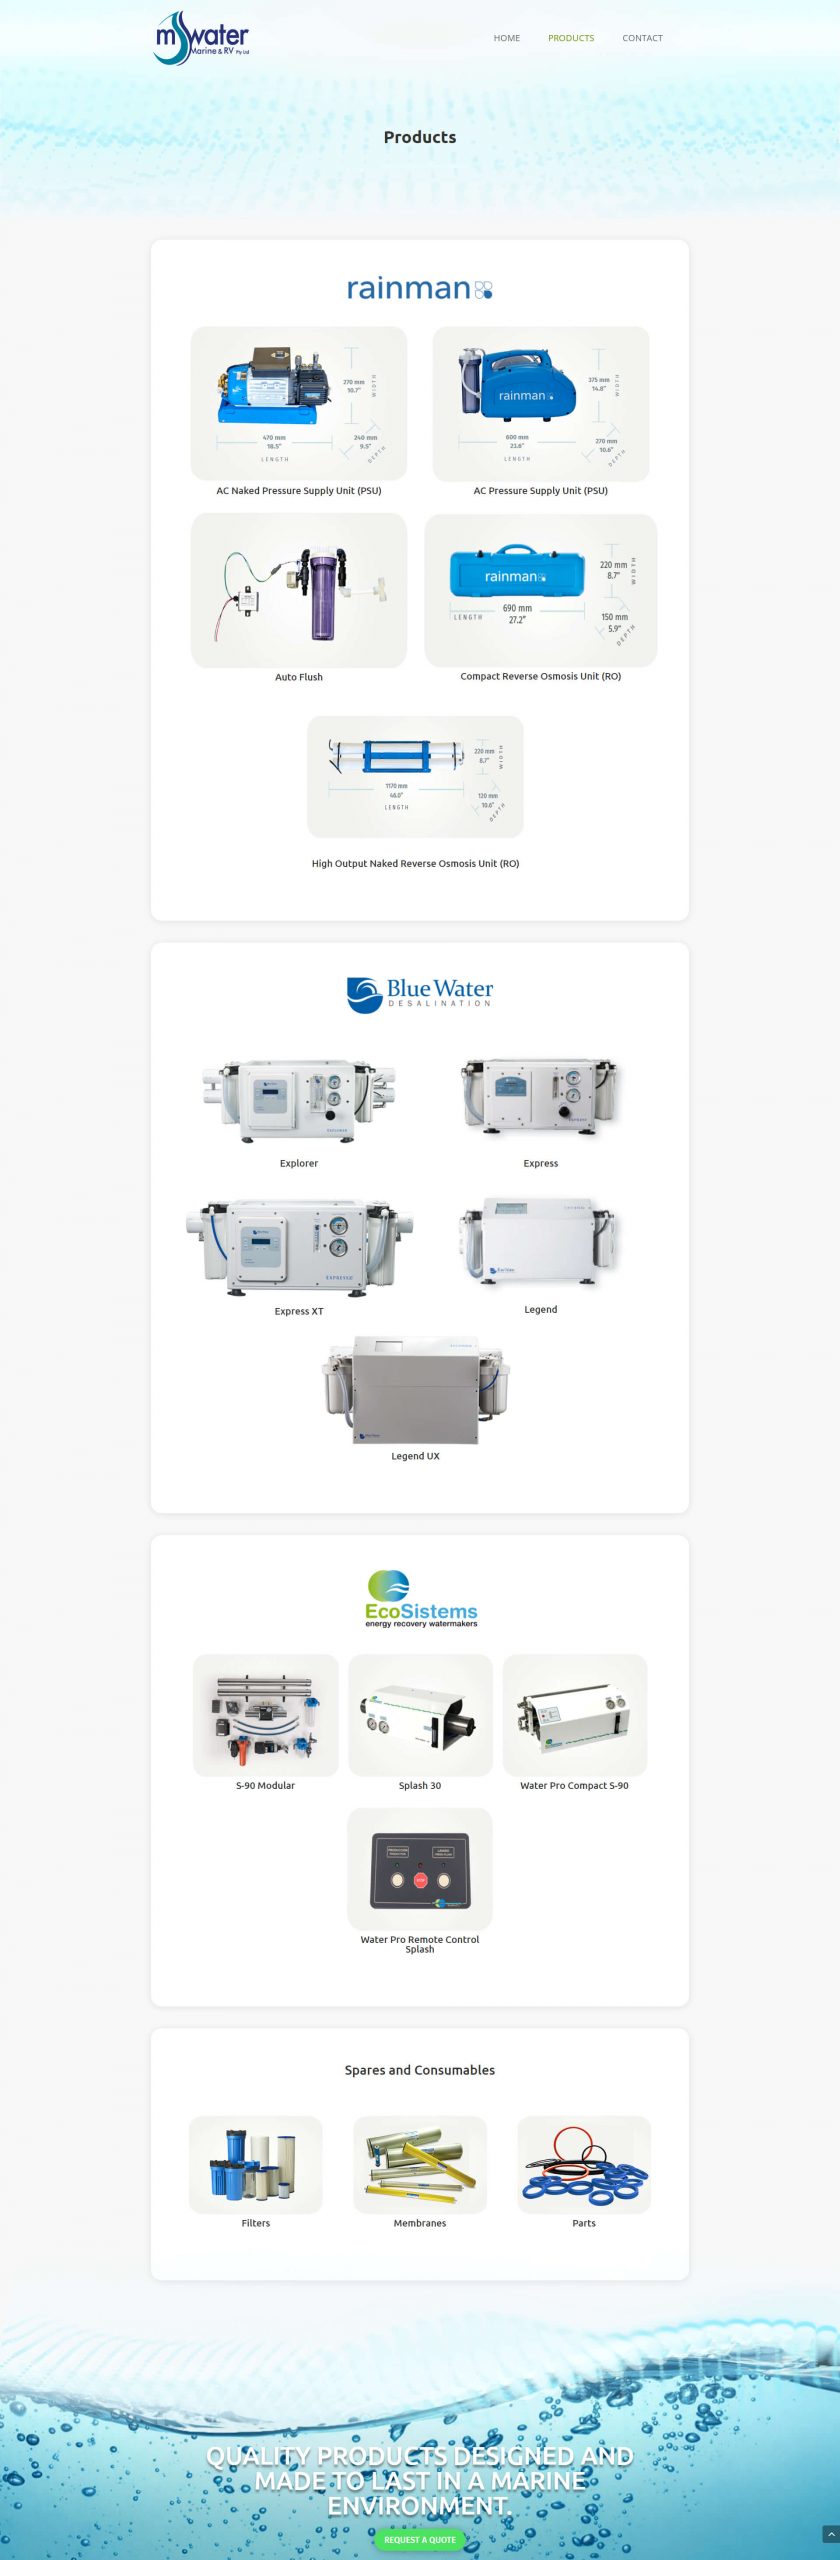 Mwater Products